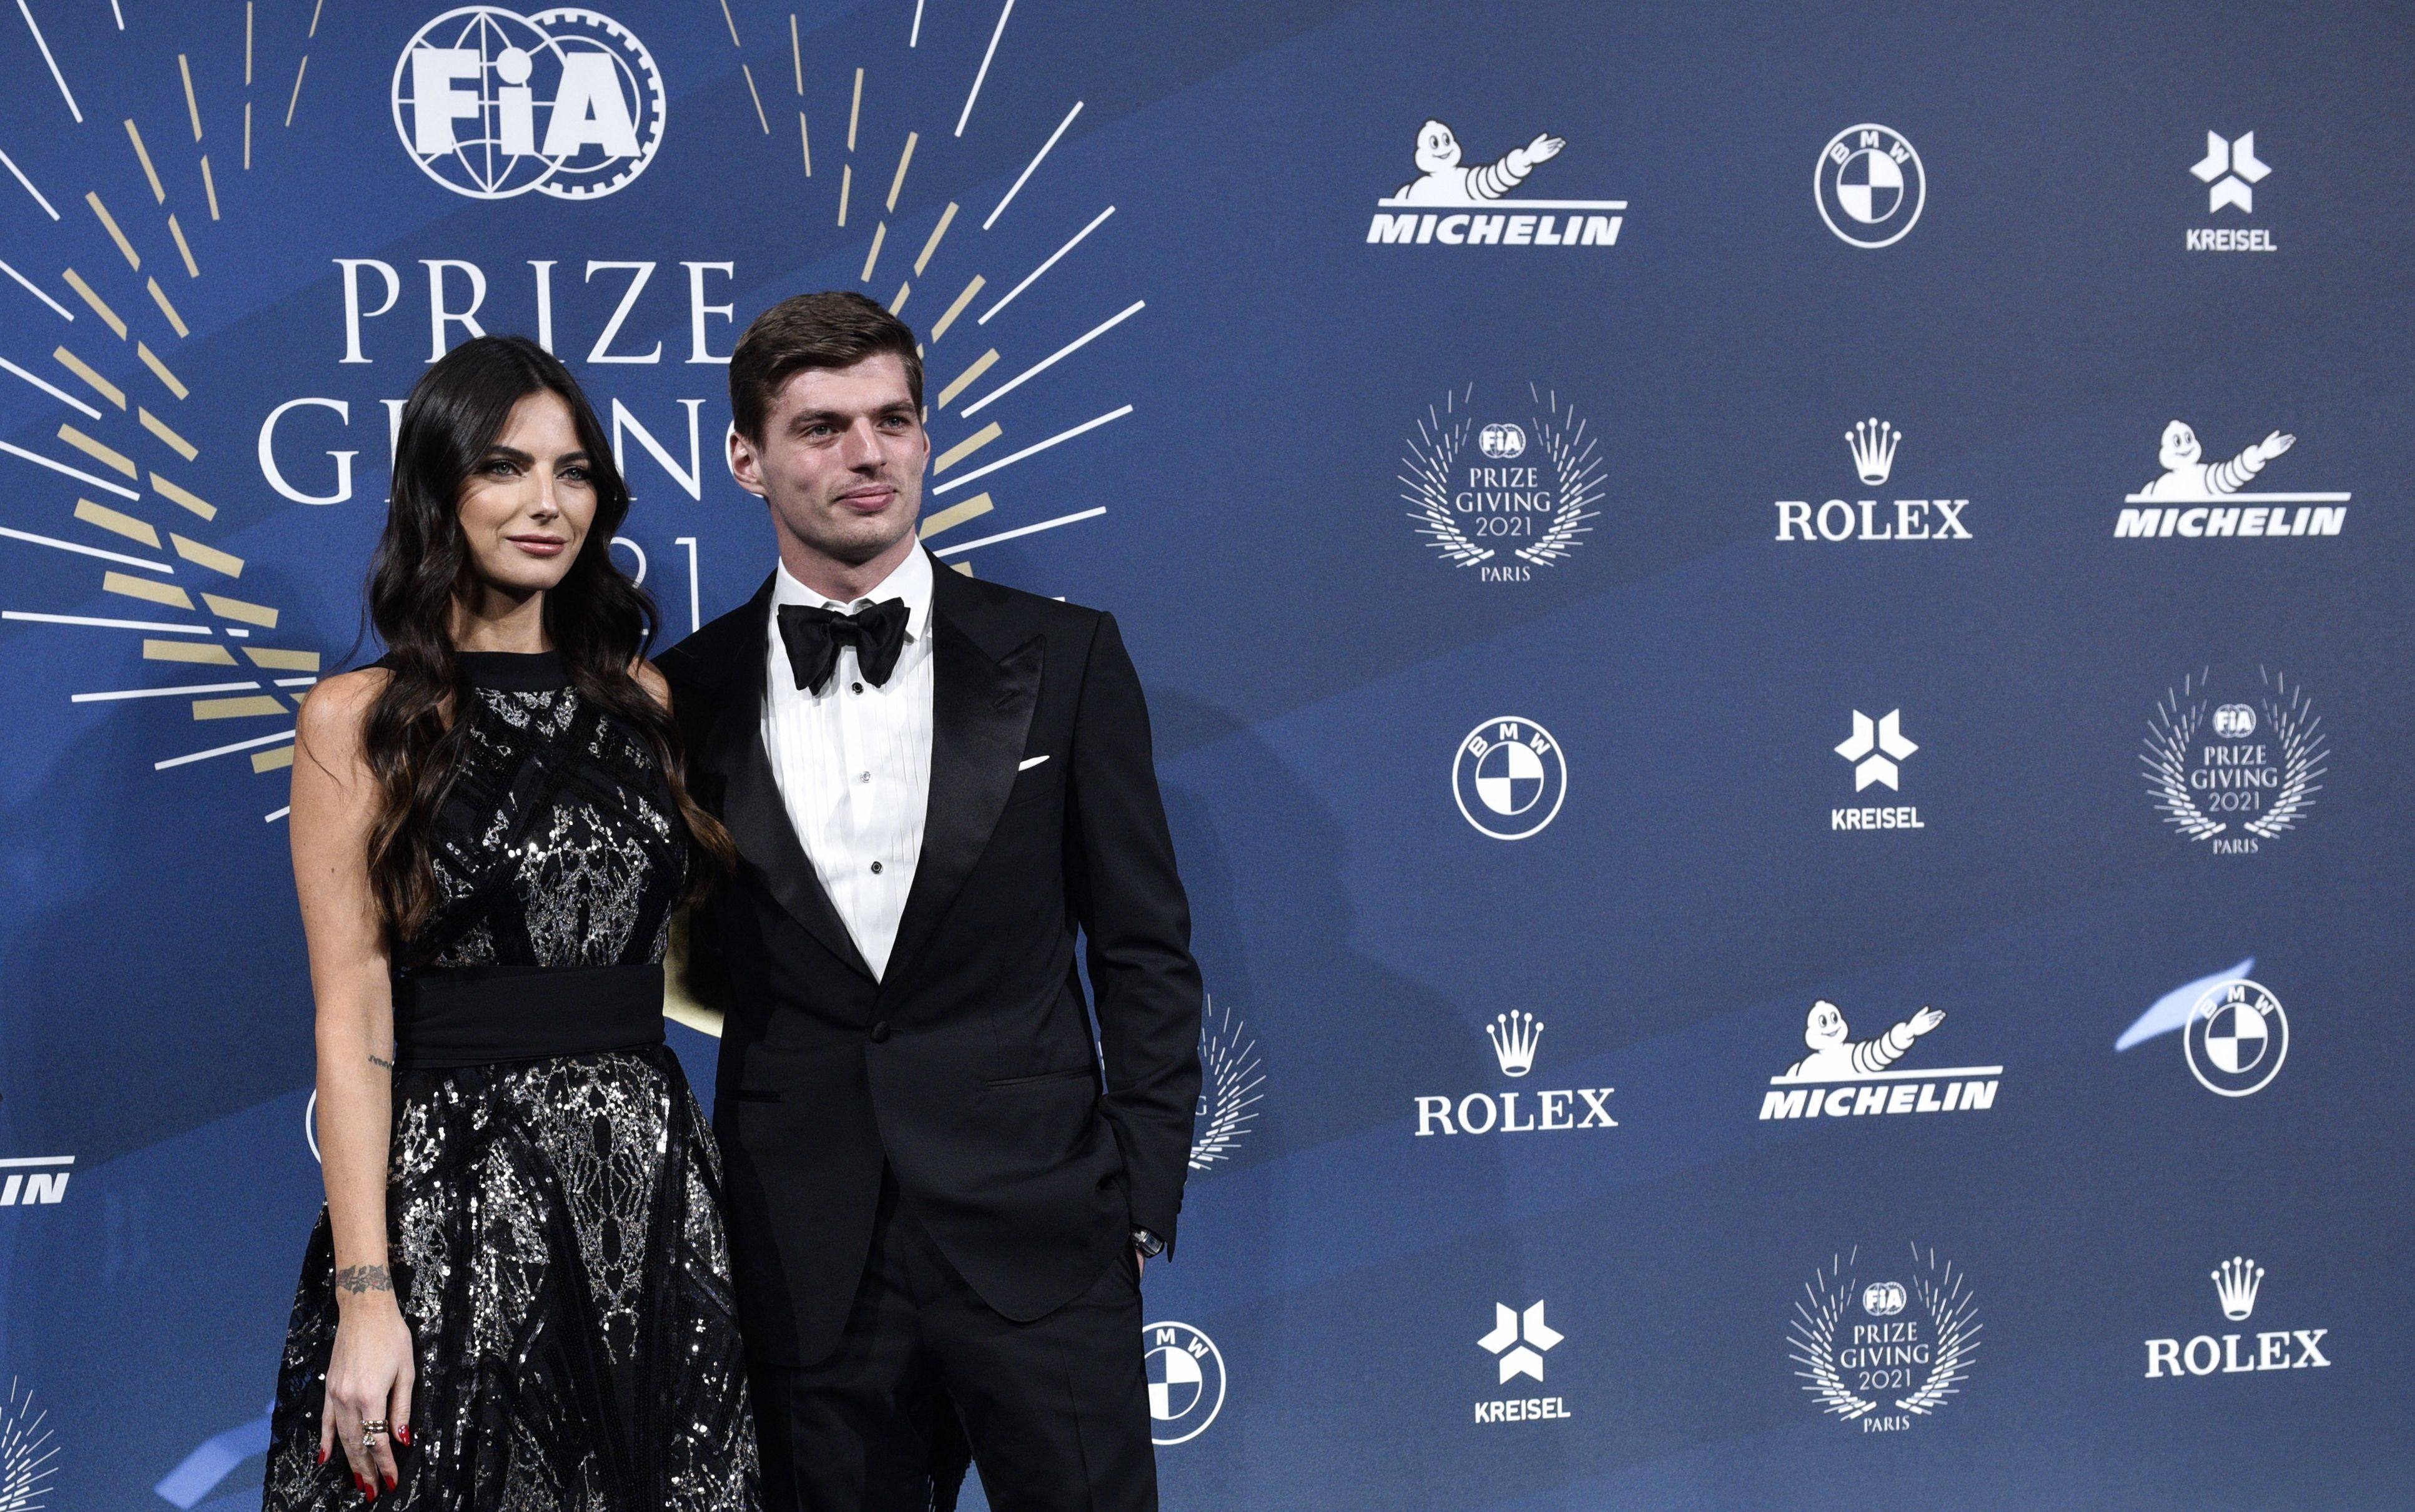 F1 world champion Max Verstappen (right) and his partner Kelly Piquet at the FIA Prize Giving 2021 gala in Paris. Photo: AFP